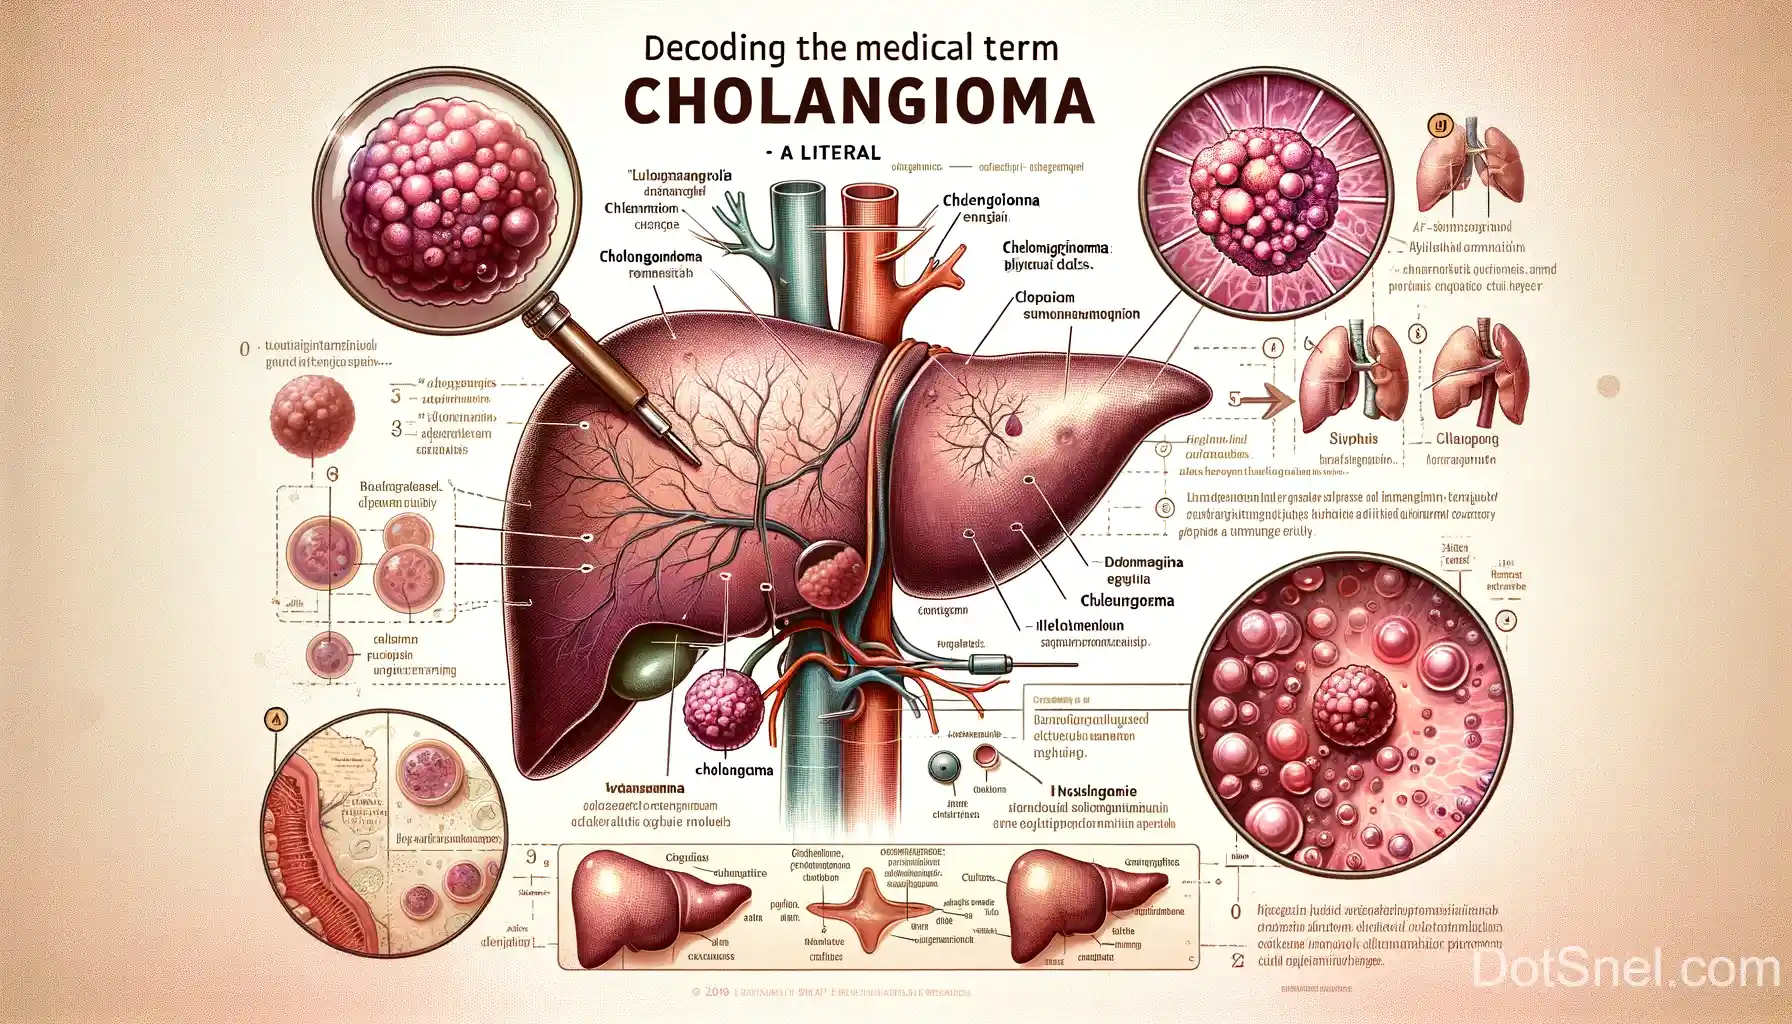 translate the medical term cholangioma as literally as possible